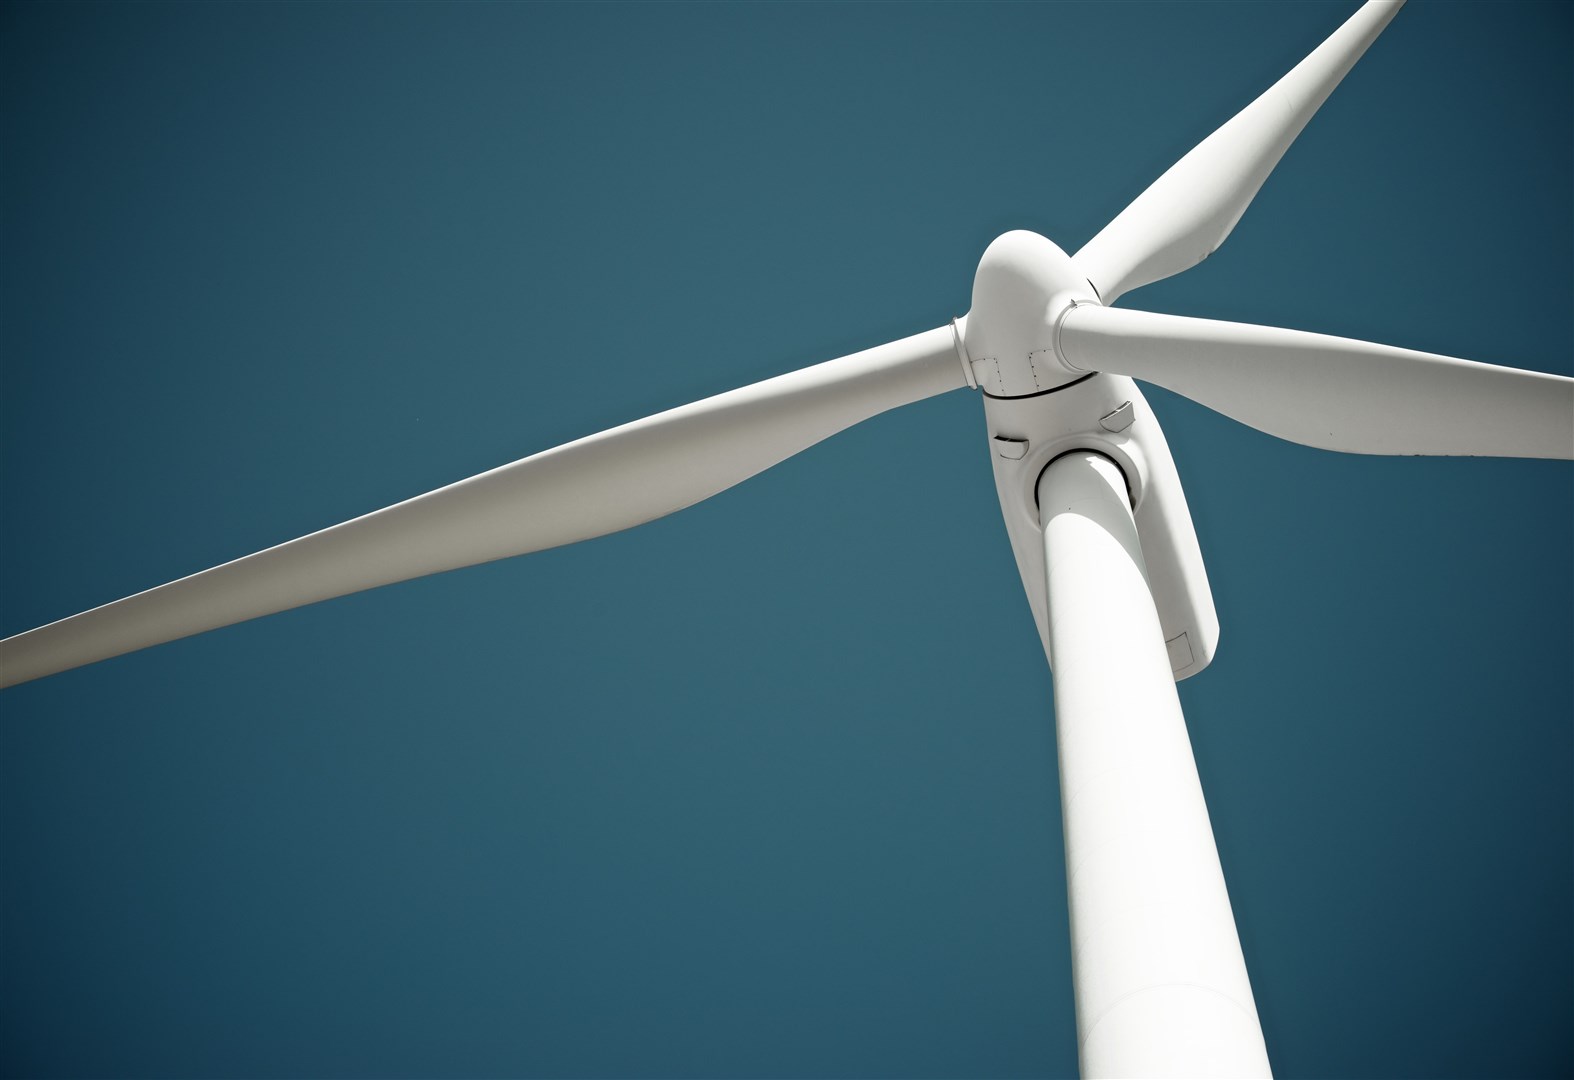 Wind farms have a vital role to play in achieving Net Zero in the prescribed timescales.